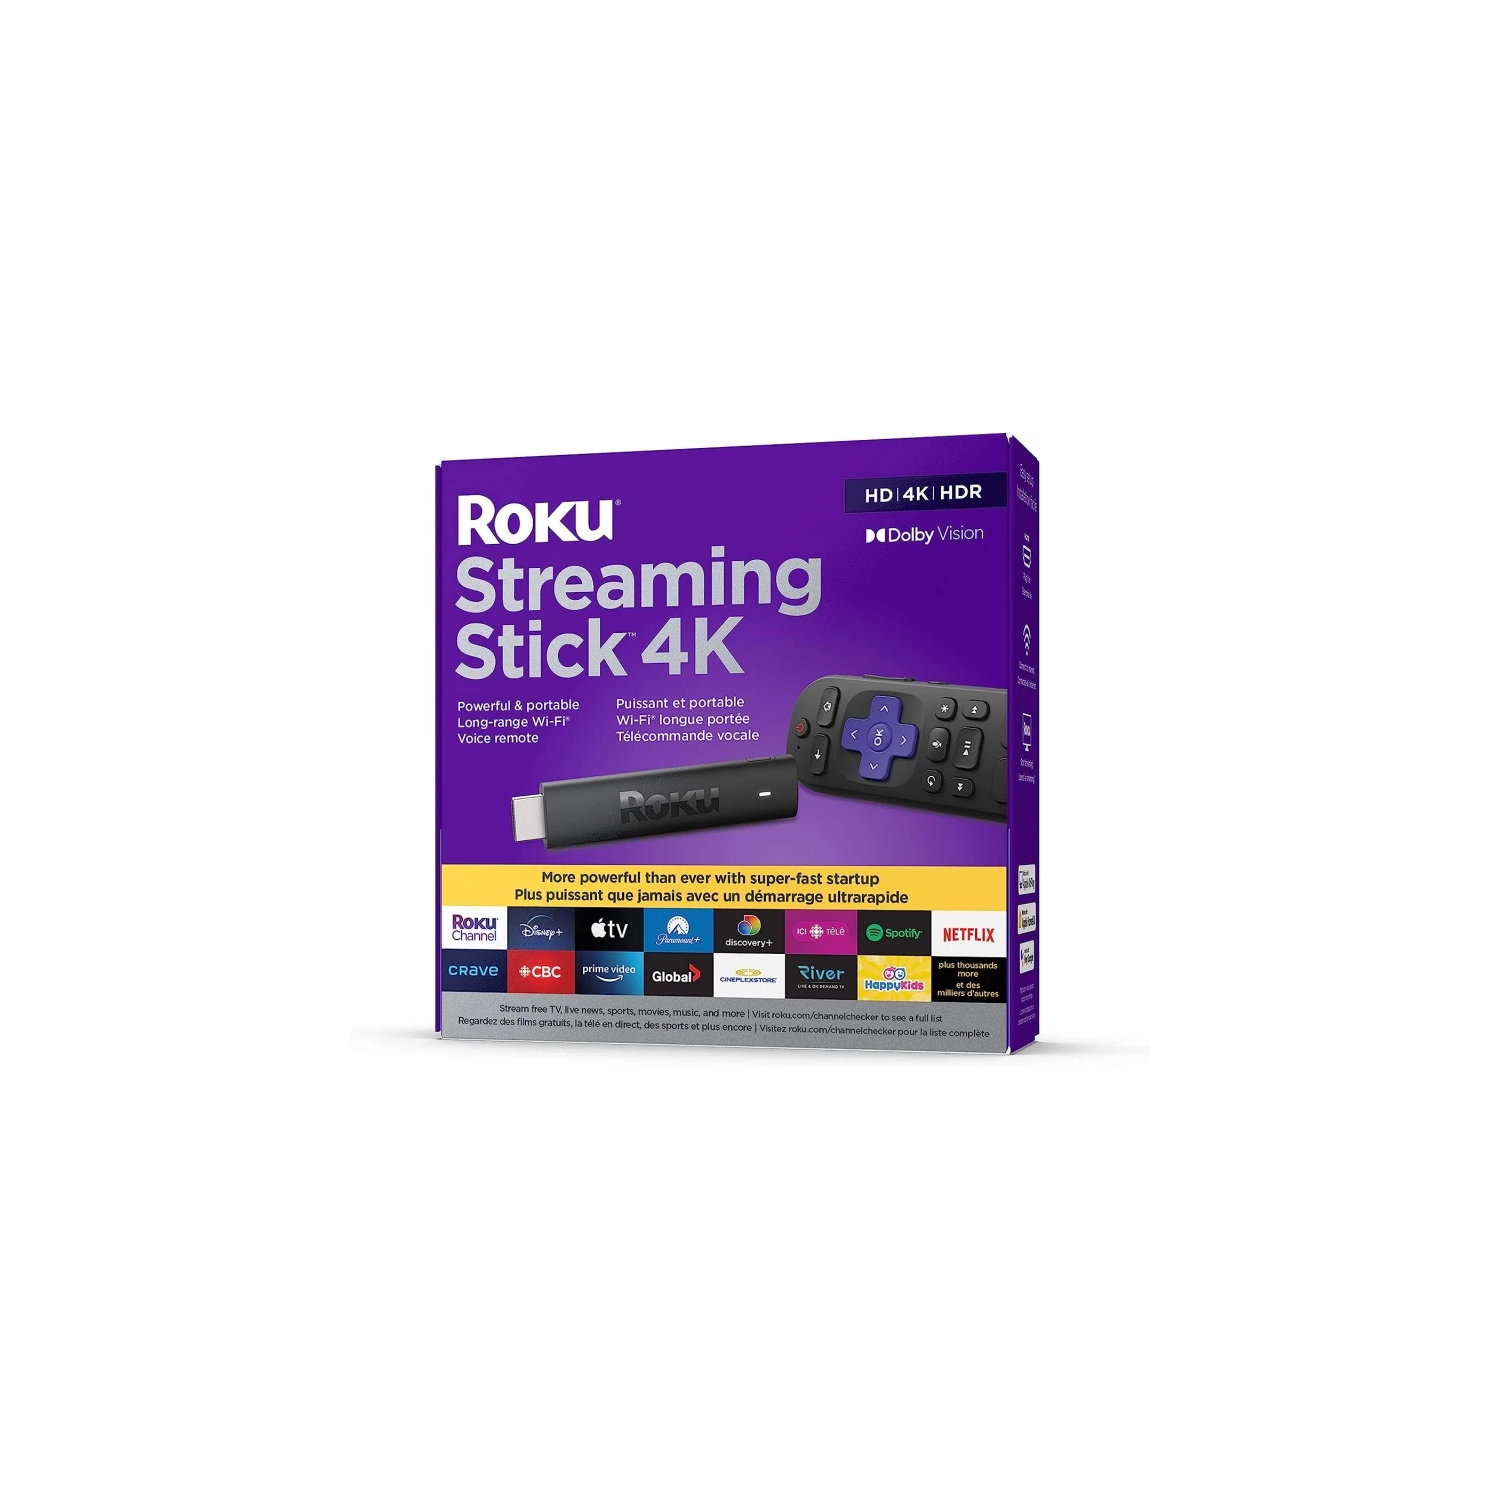 Roku Streaming Stick 4K 2022 - Official Manufacturer Product | 4K/HDR/Dolby Vision Streaming Device with Voice Remote, TV Controls, and Long-Range Wi-Fi